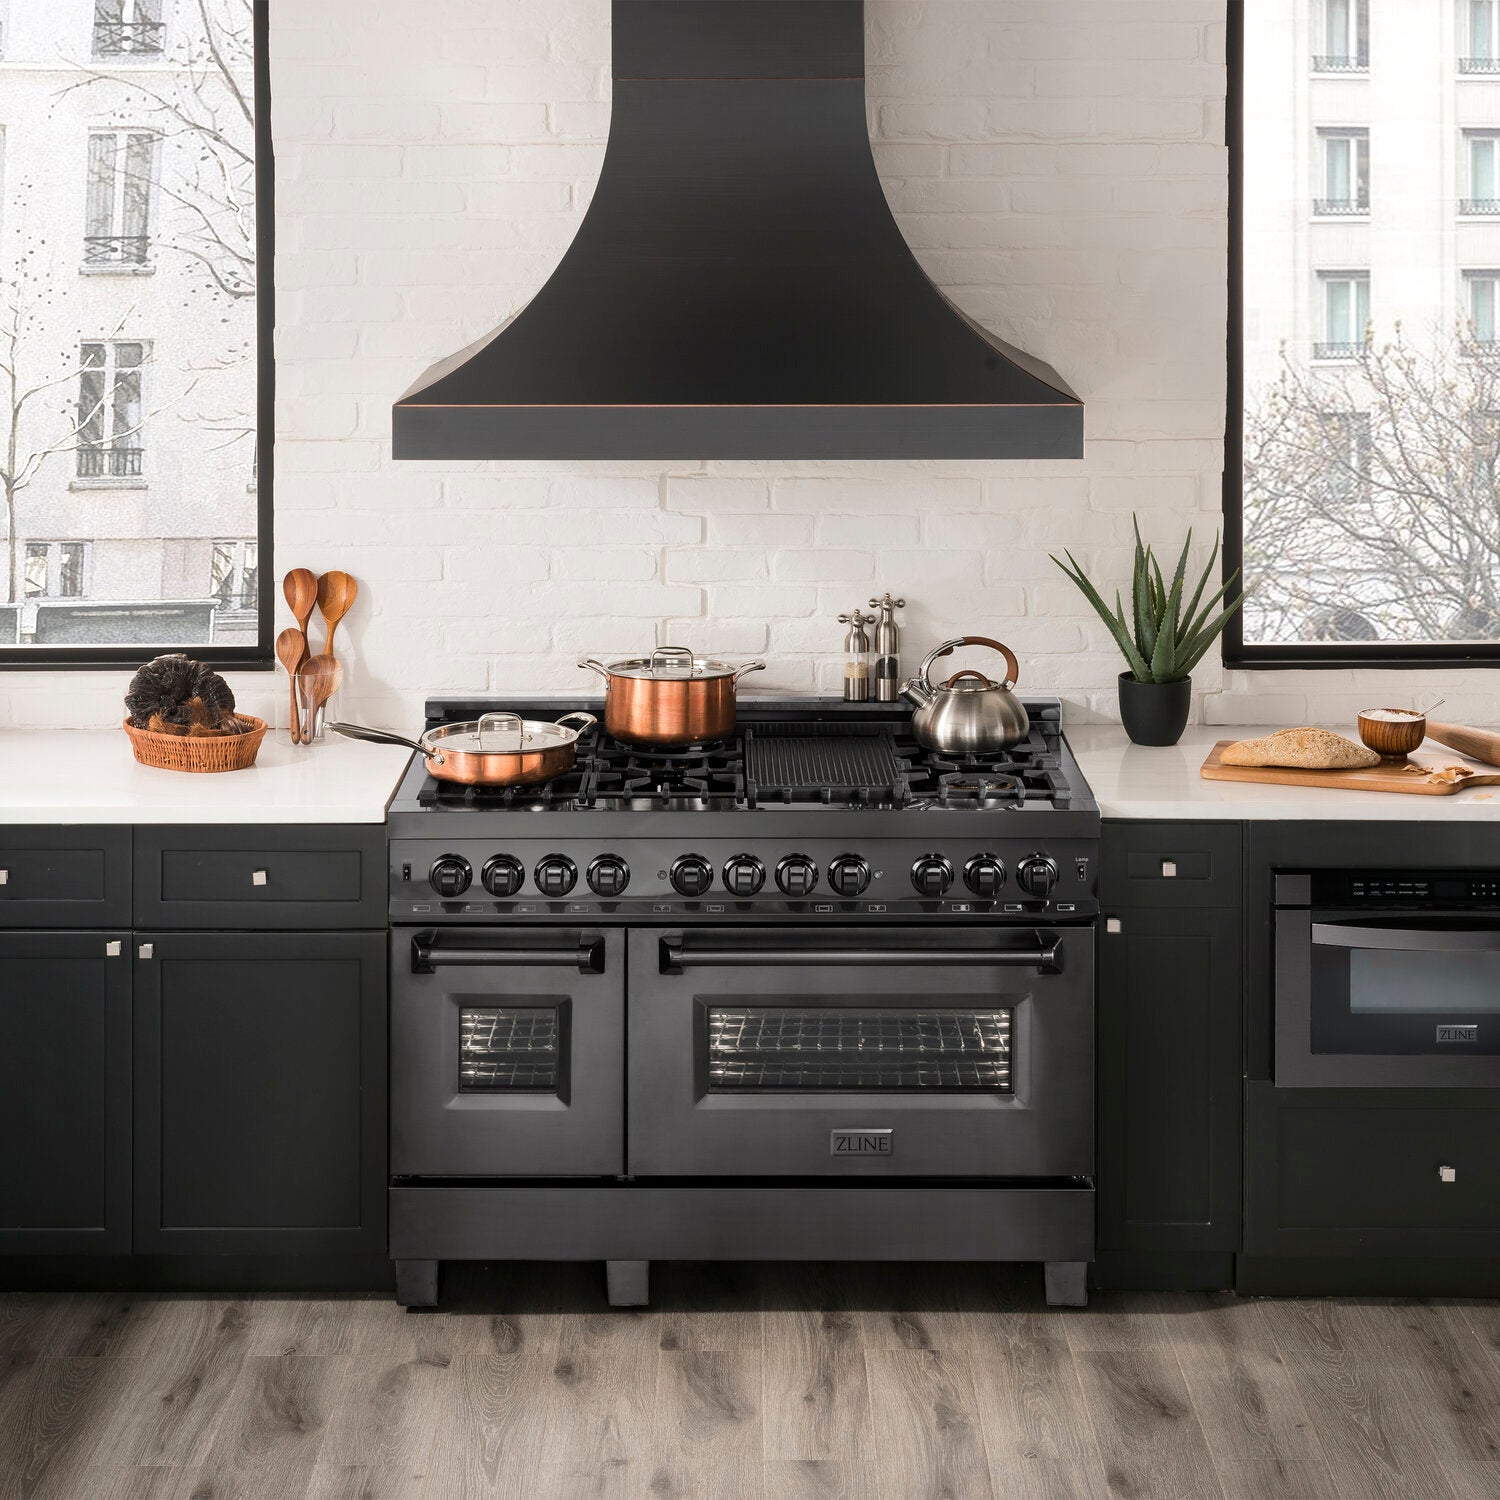 ZLINE 60" Dual Fuel Range with Gas Stove and Electric Oven in Black Stainless Steel with Brass Burners - RAB-60